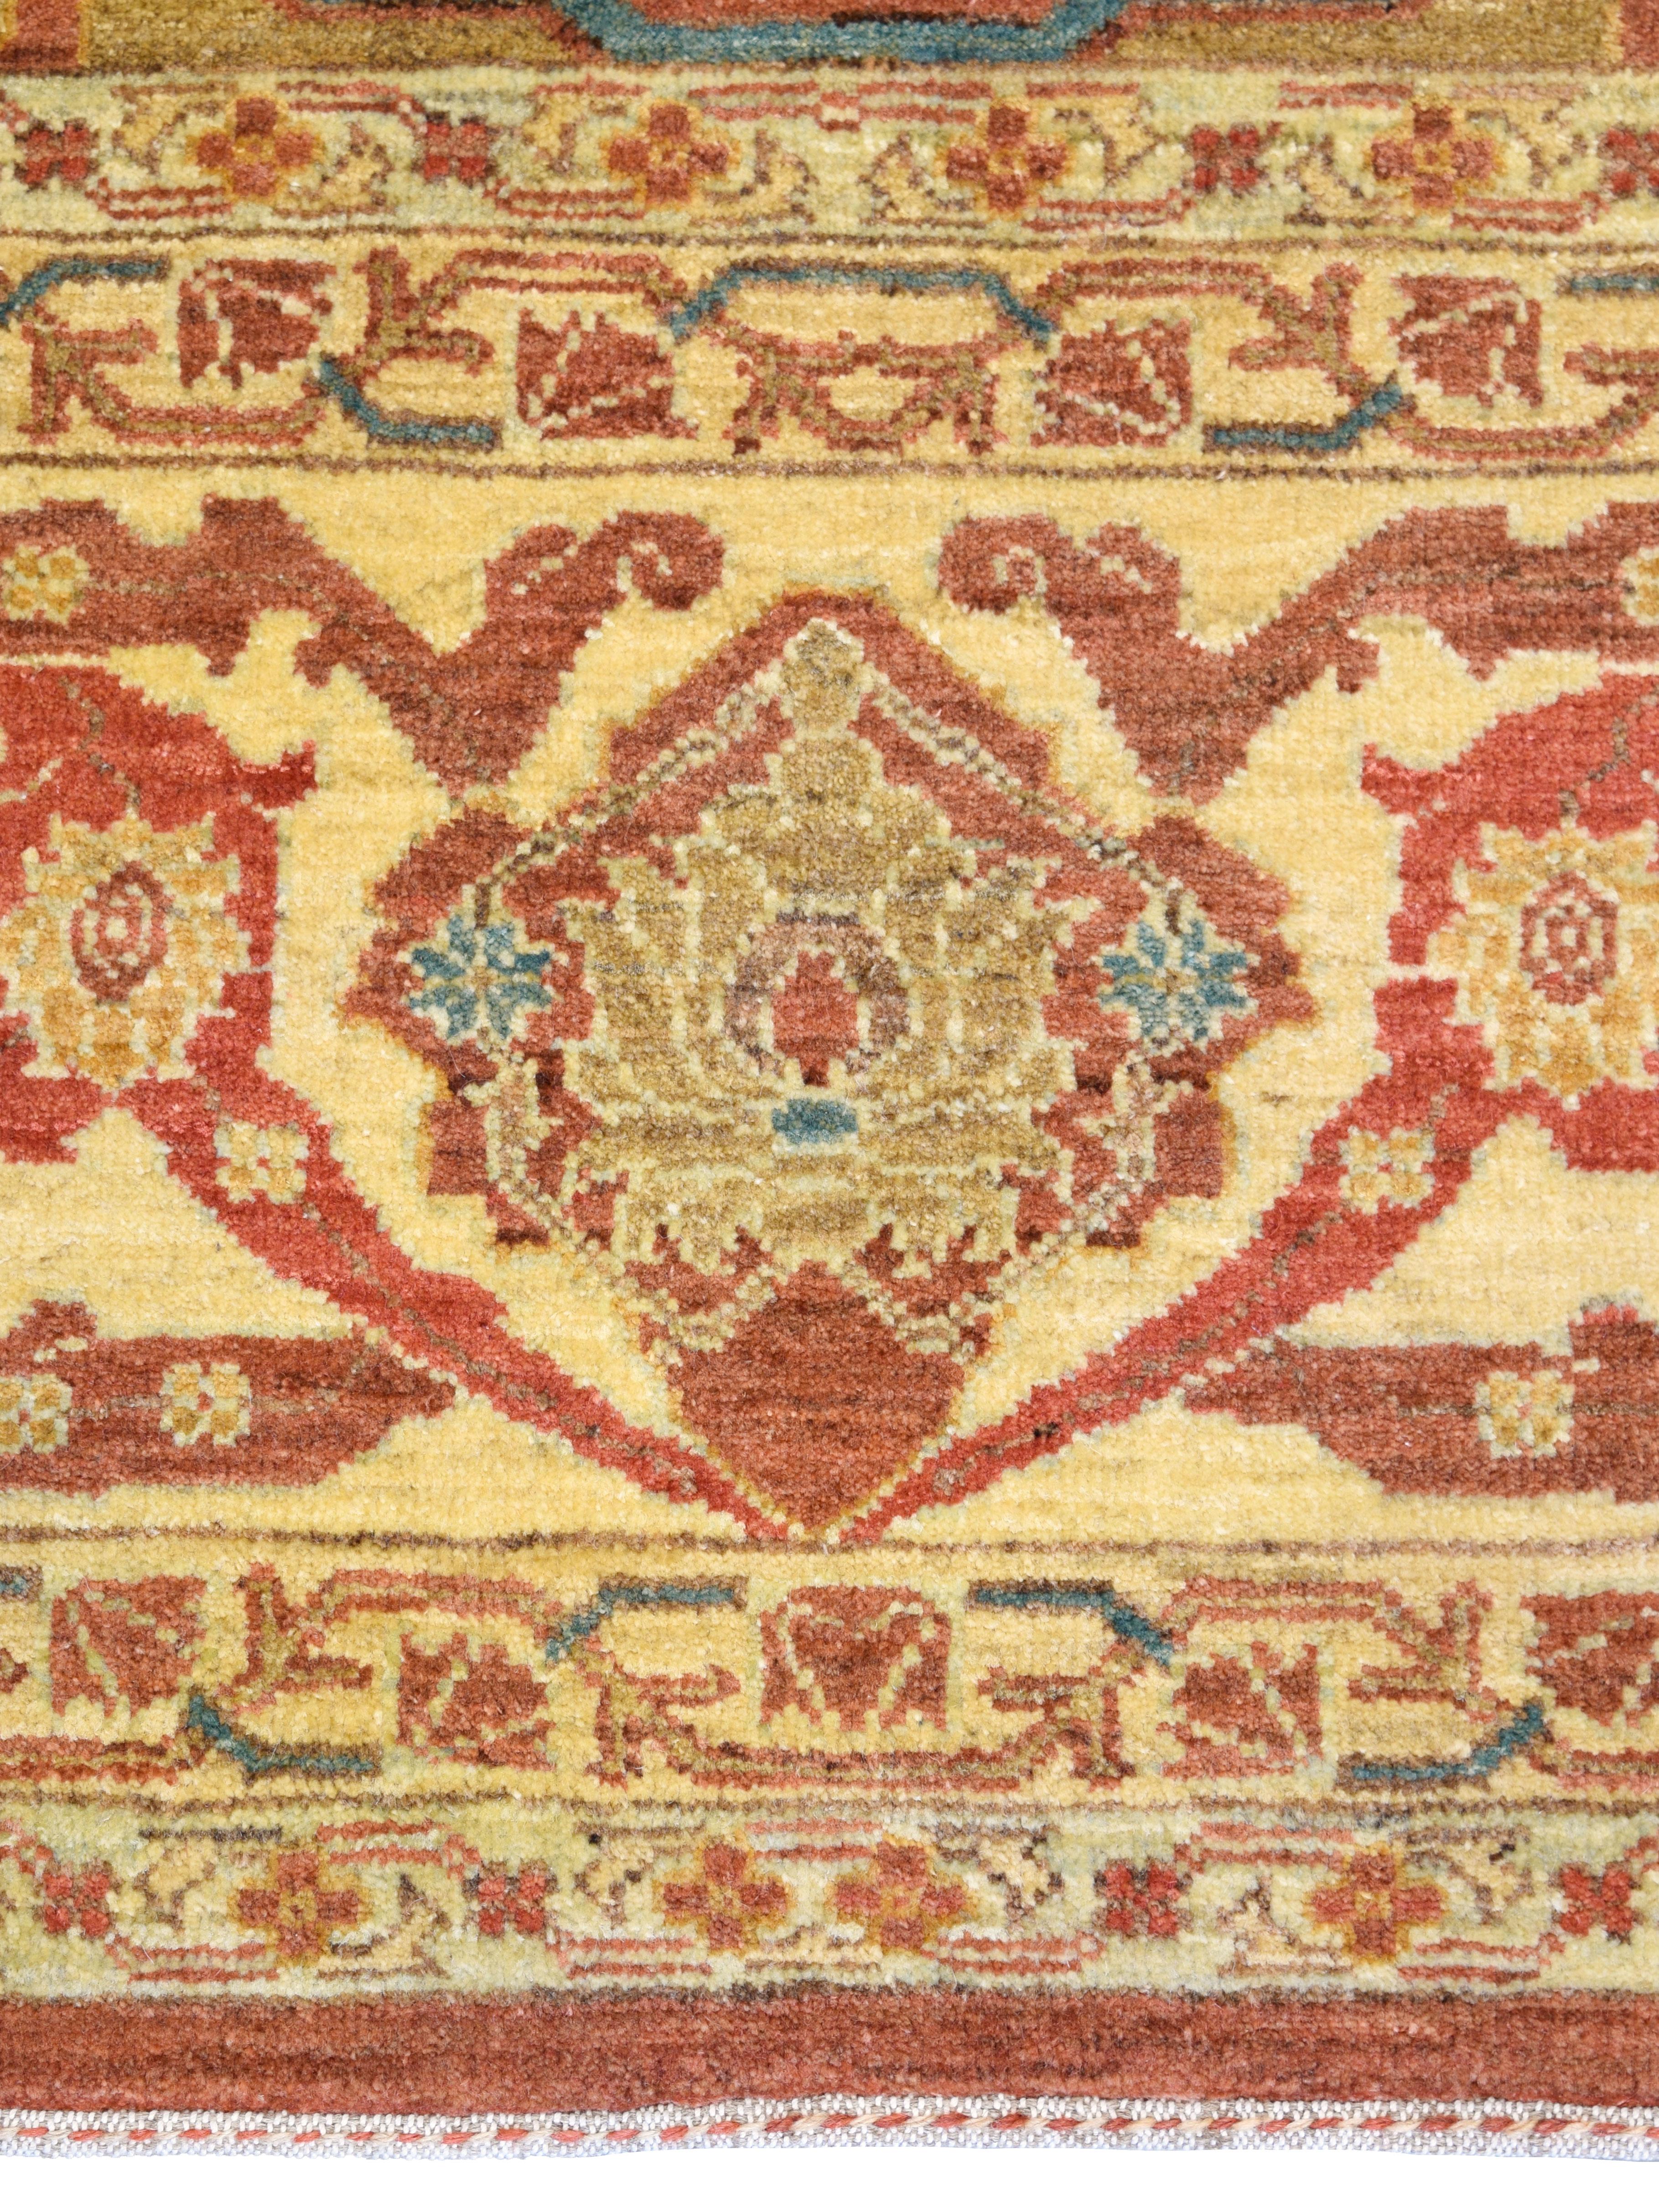 Hand-Knotted, Wool Transitional Bidjar Heriz Rug, Red, Taupe, Blue,  9’ x 12’ For Sale 7